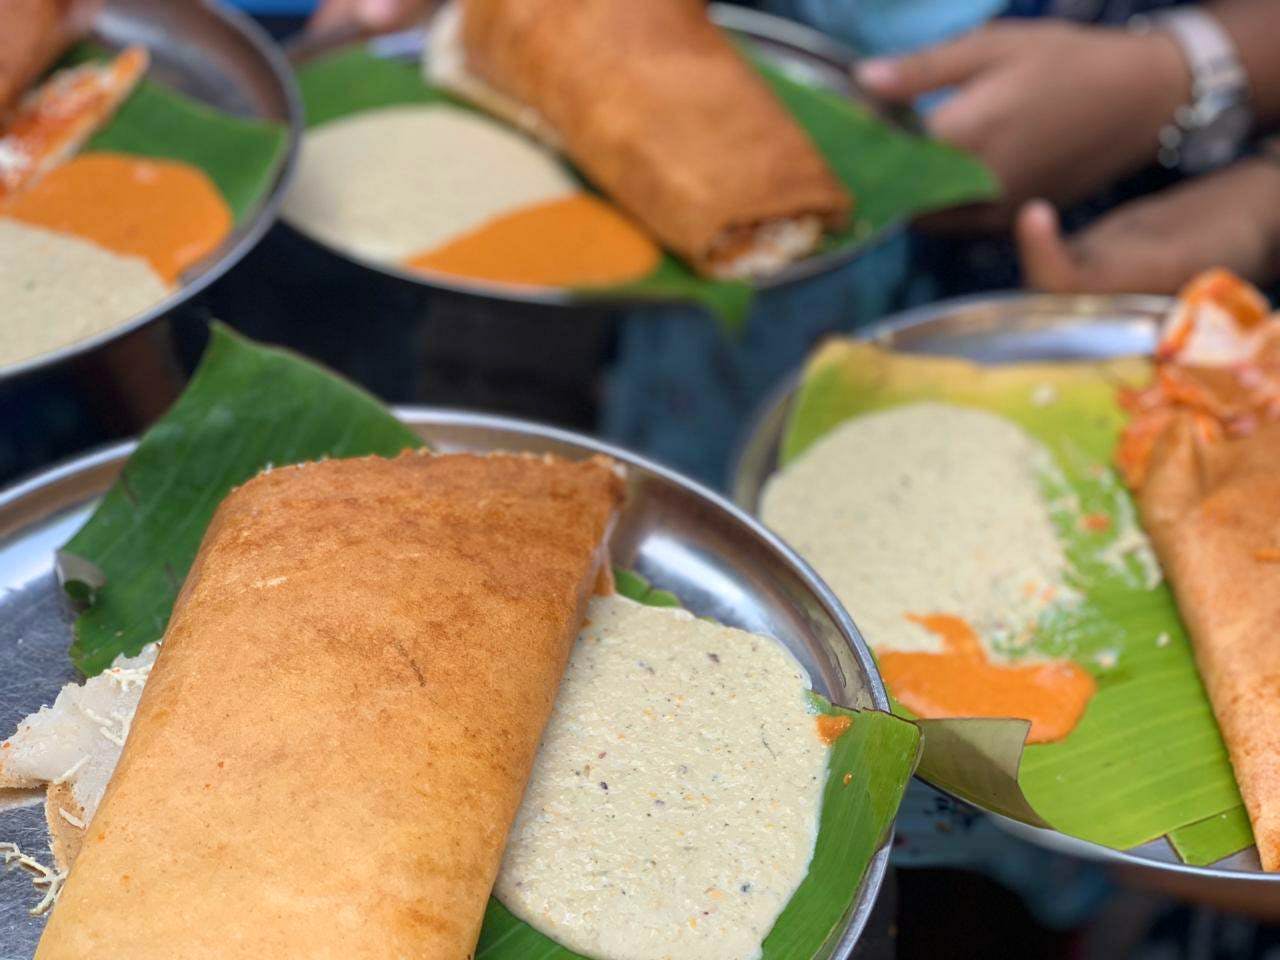 Dish,Food,Cuisine,Ingredient,Dosa,Meal,Indian cuisine,Taquito,Produce,Sandwich wrap